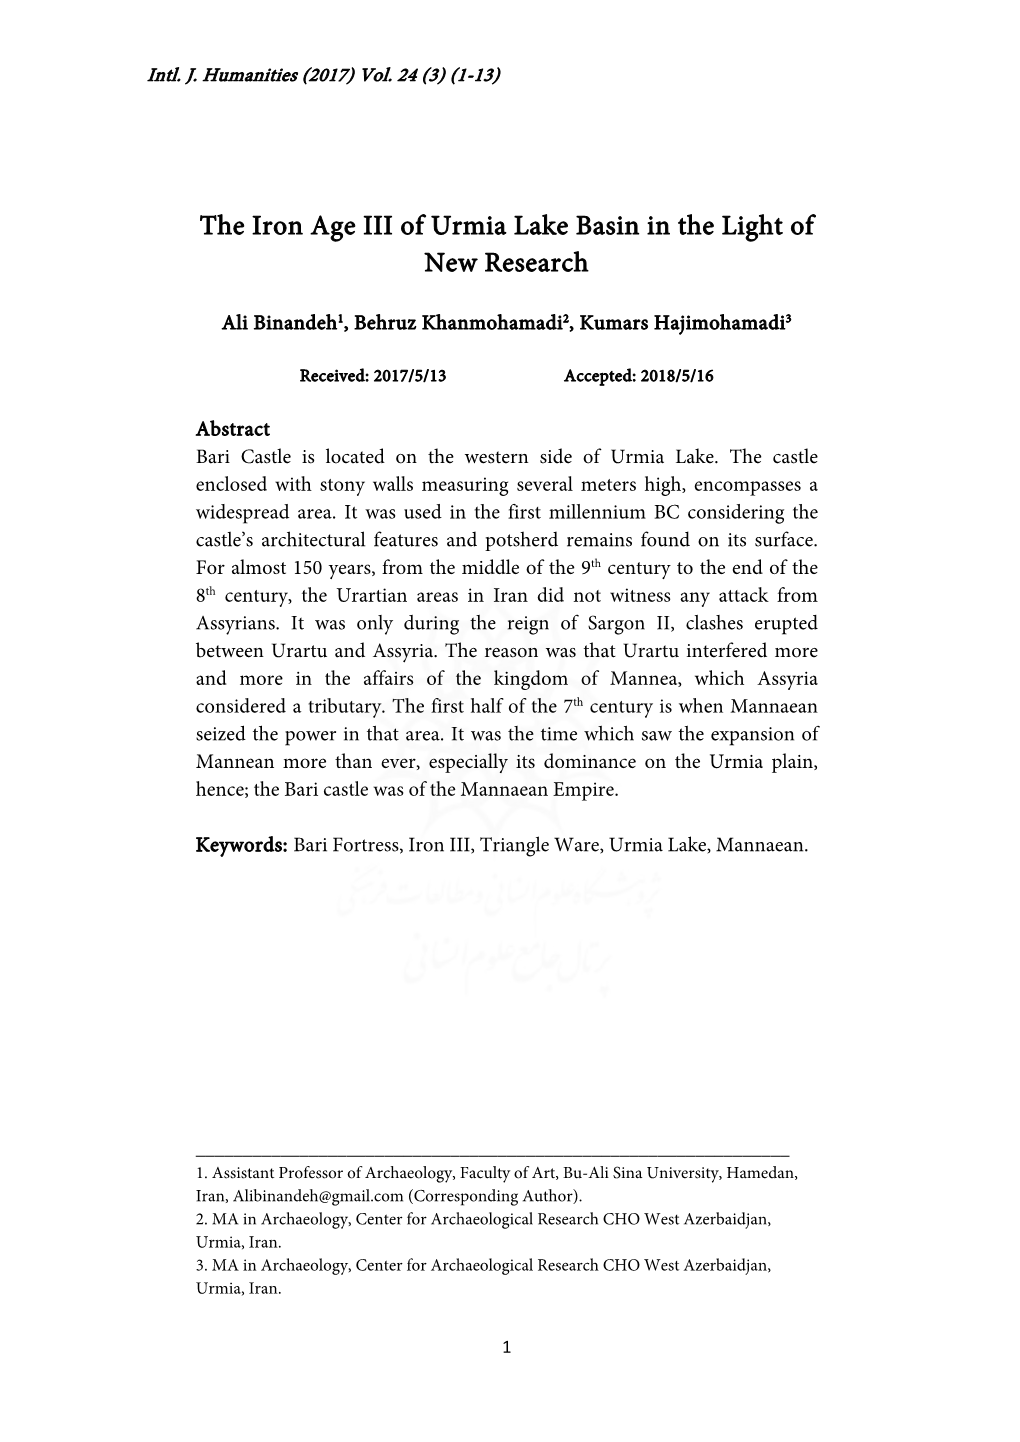 The Iron Age III of Urmia Lake Basin in the Light of New Research